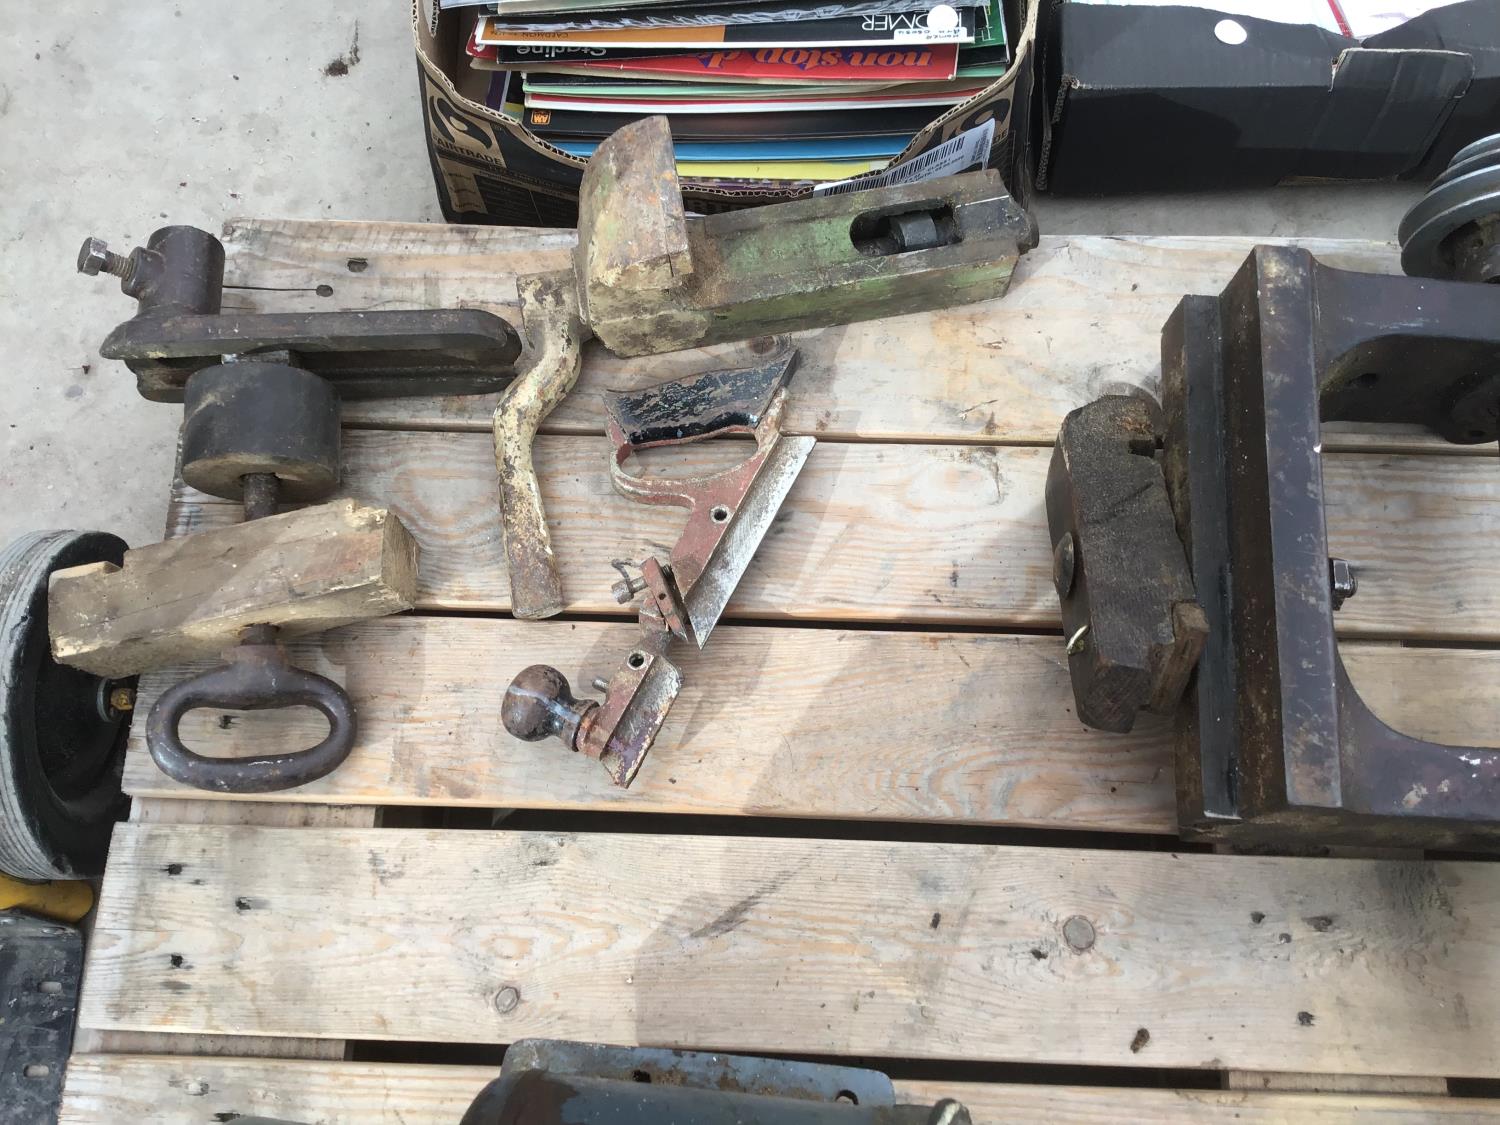 VARIOUS ITEMS TO INCLUDE A SINGER SEWING MACHINE MOTOR, DRILL AND OTHER HEAVY DUTY ATTACHMENTS - Image 3 of 4